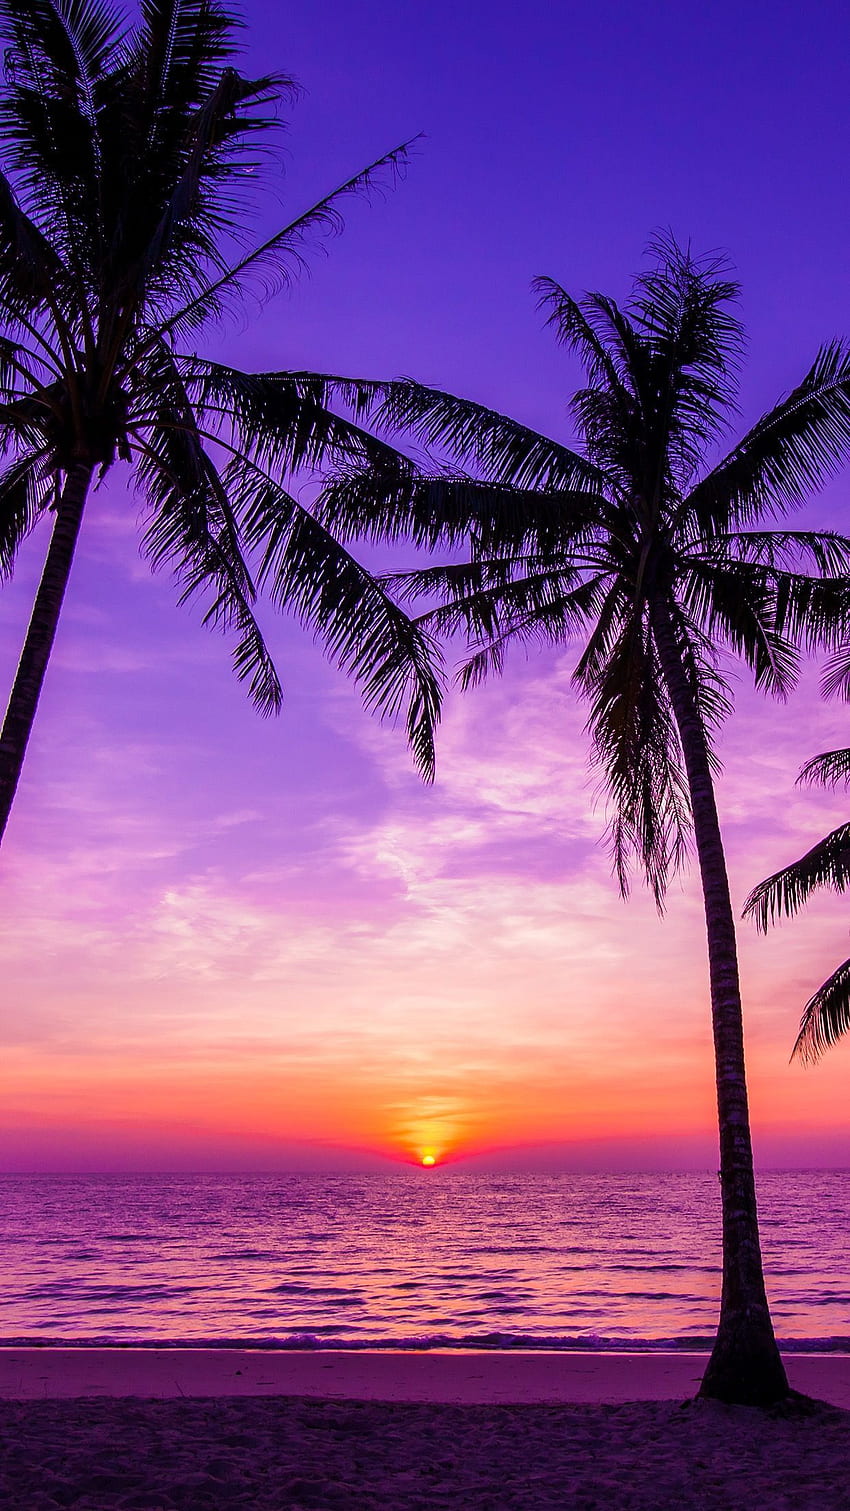 Sunset Aesthetic Wallpaper Browse Sunset Aesthetic Wallpaper with  collections o  Sunset wallpaper Beautiful wallpapers backgrounds Pretty  wallpapers backgrounds